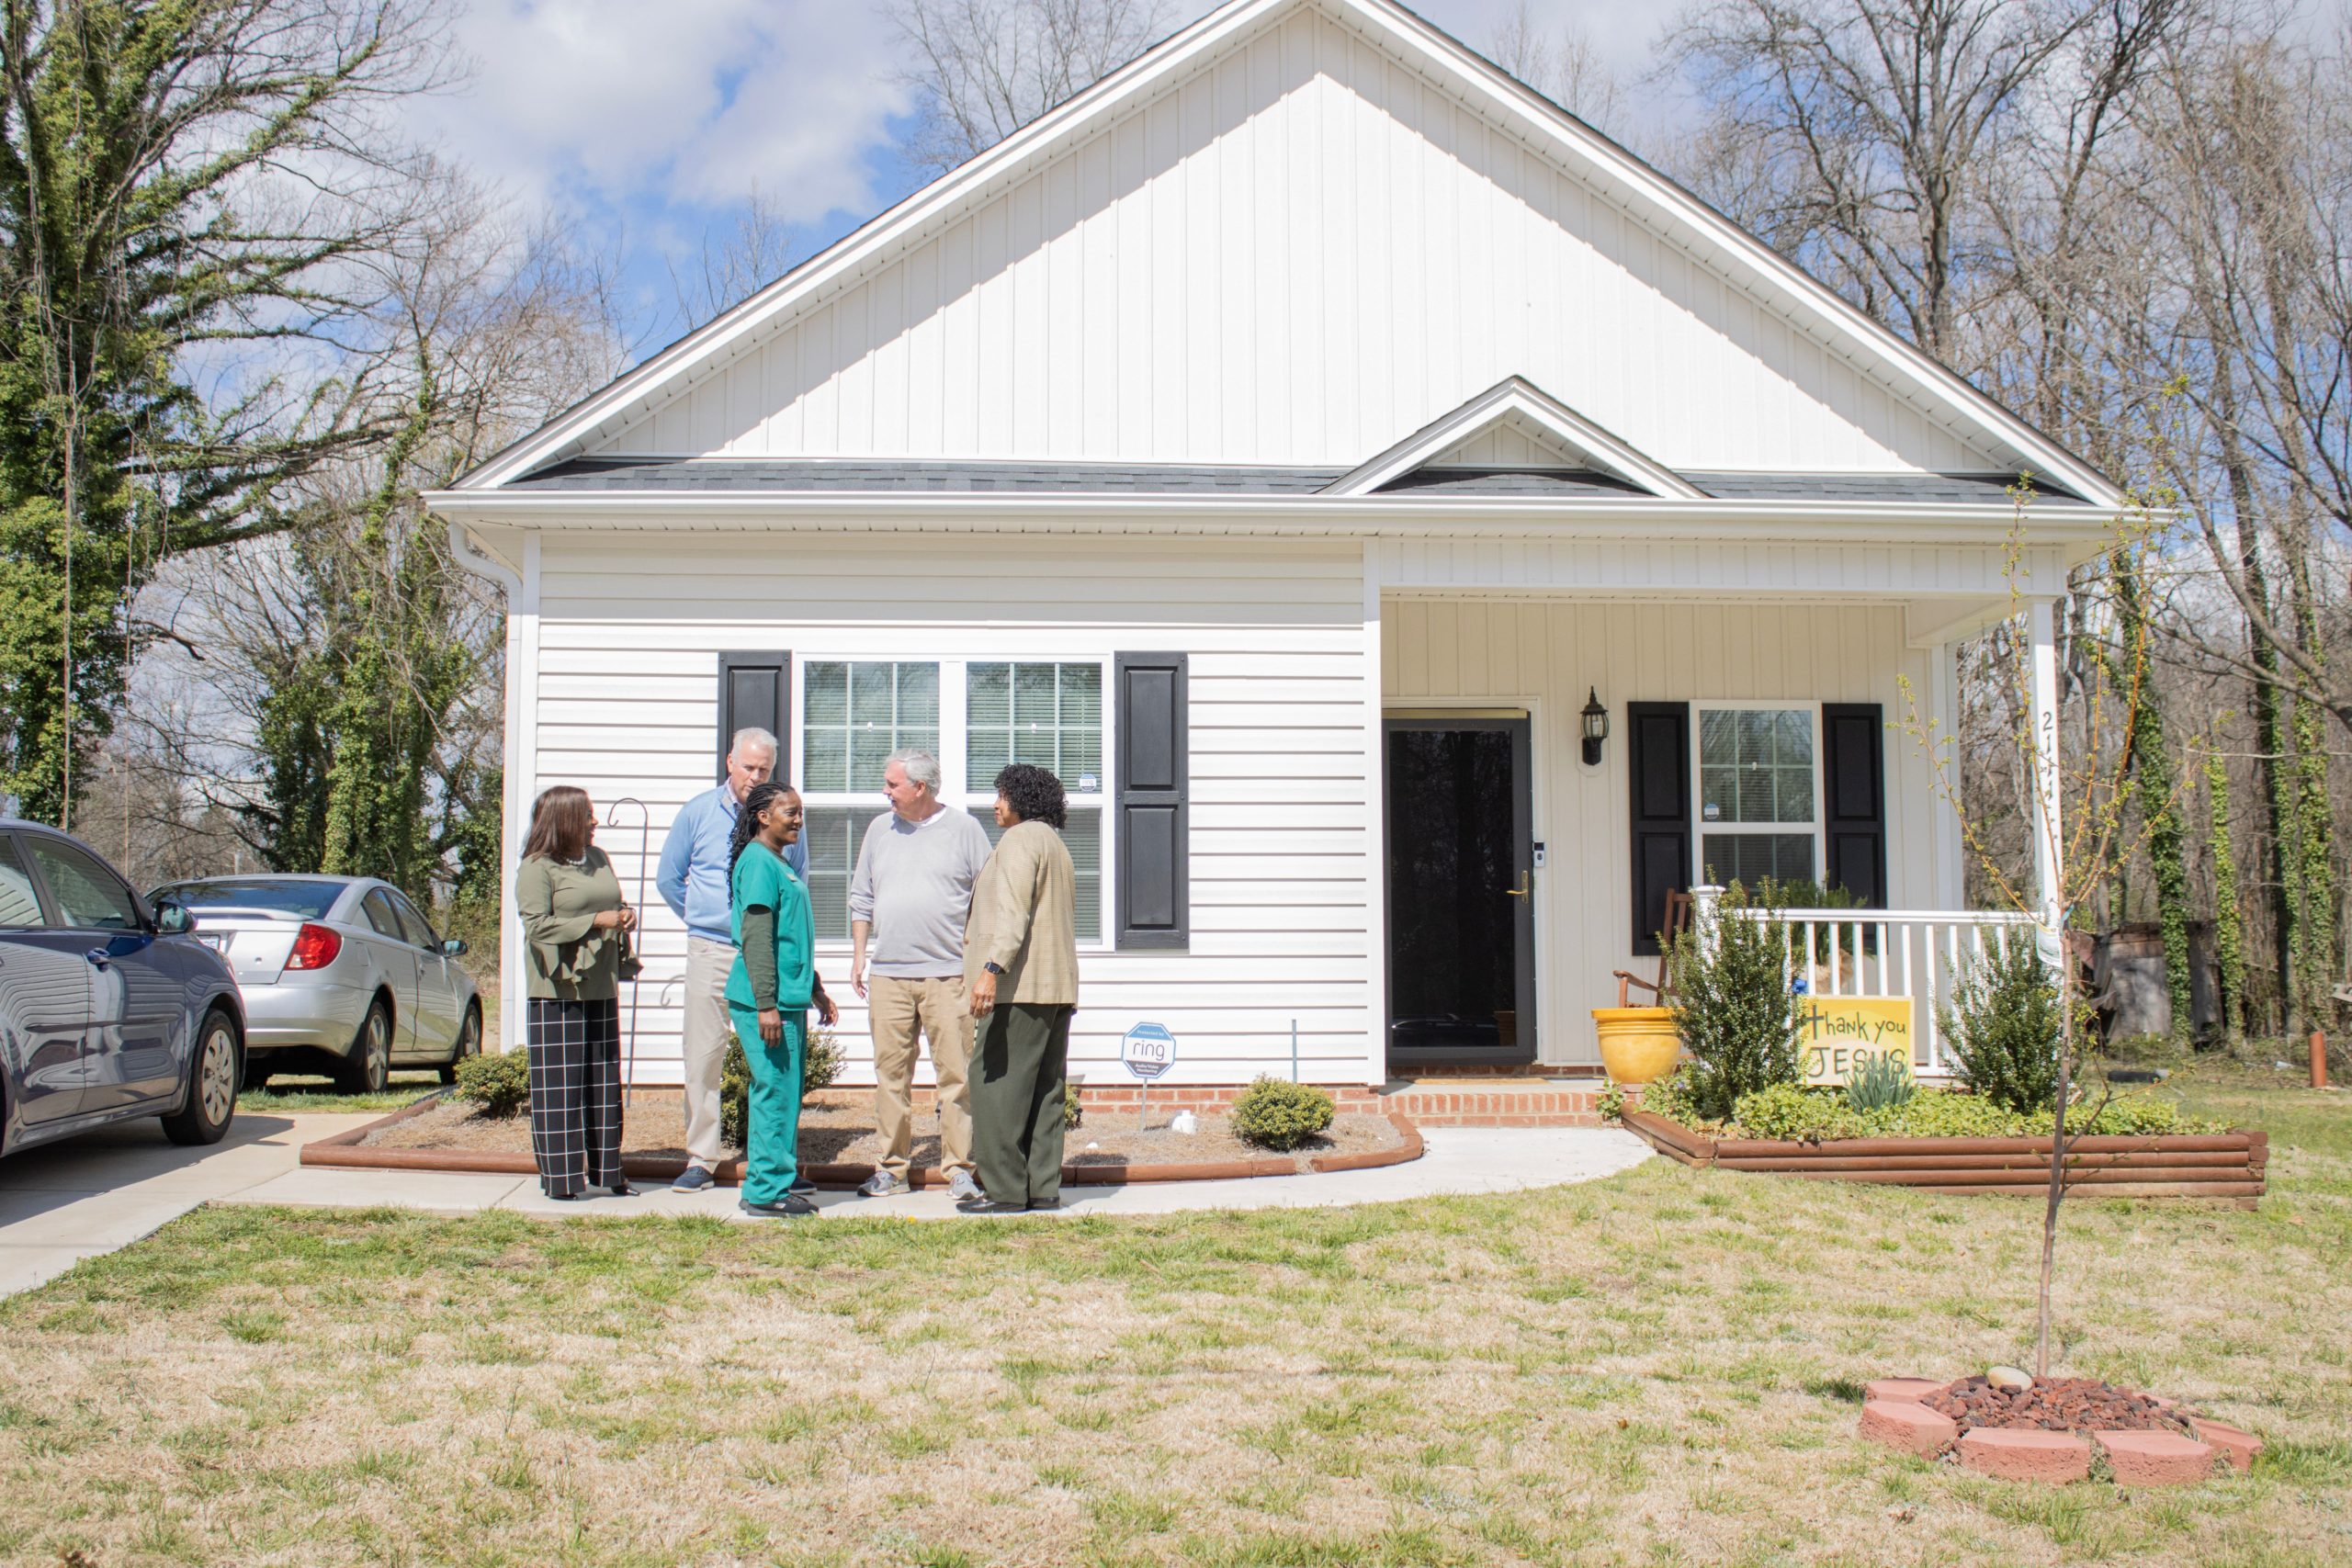 A group of people stand together in front of a new construction house in High Point, NC.